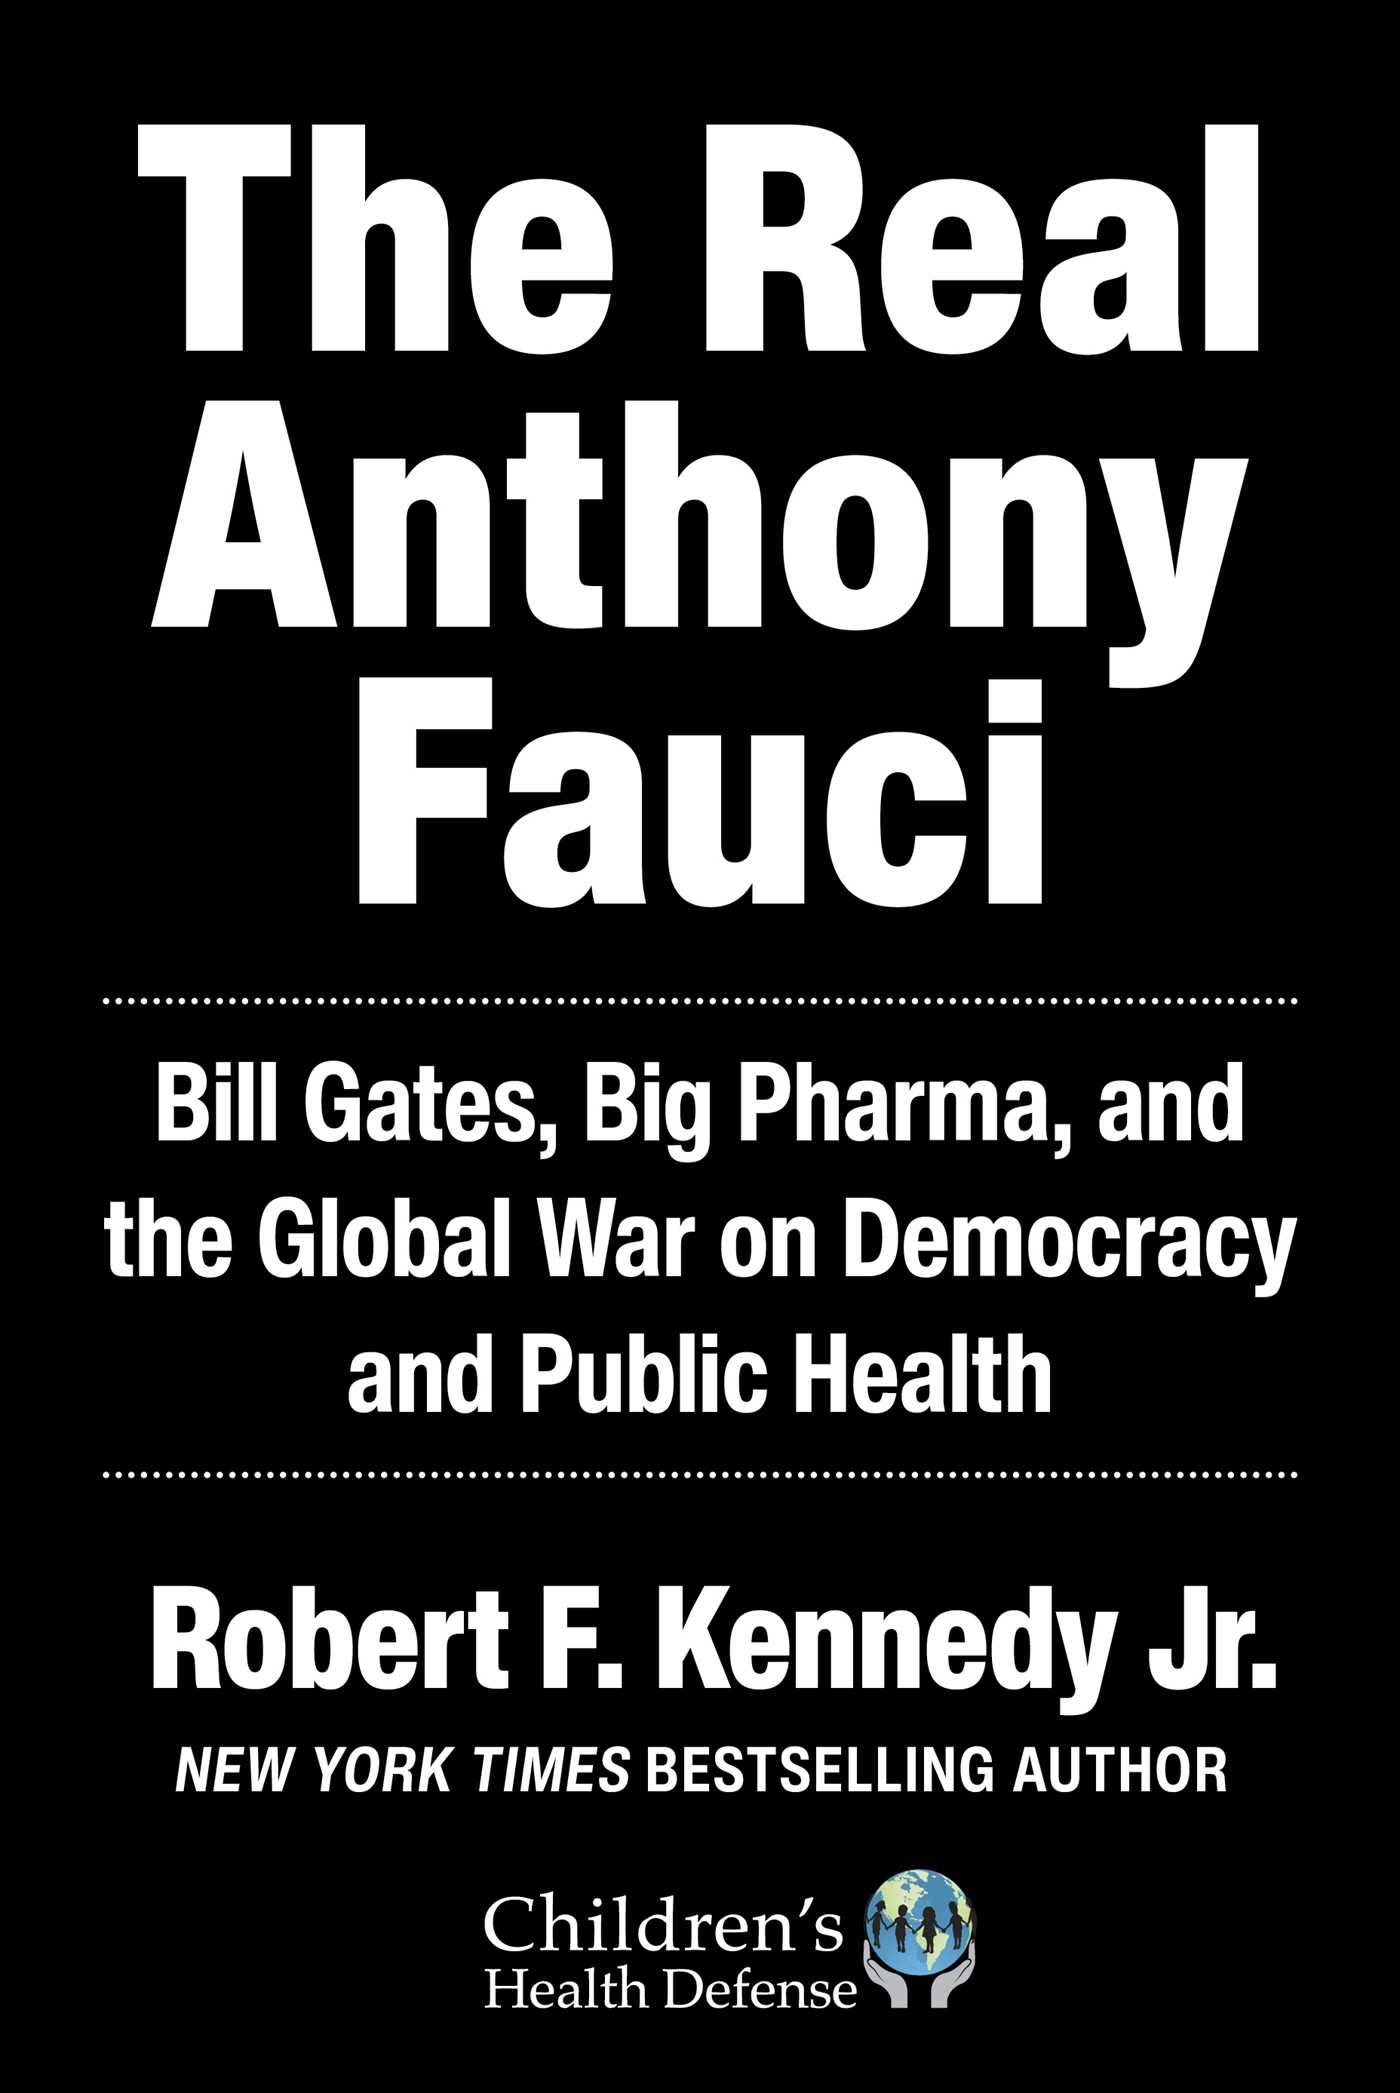 The Real Anthony Fauci Bill Gates, Big Pharma, and the Global War on Democracy and Public Health